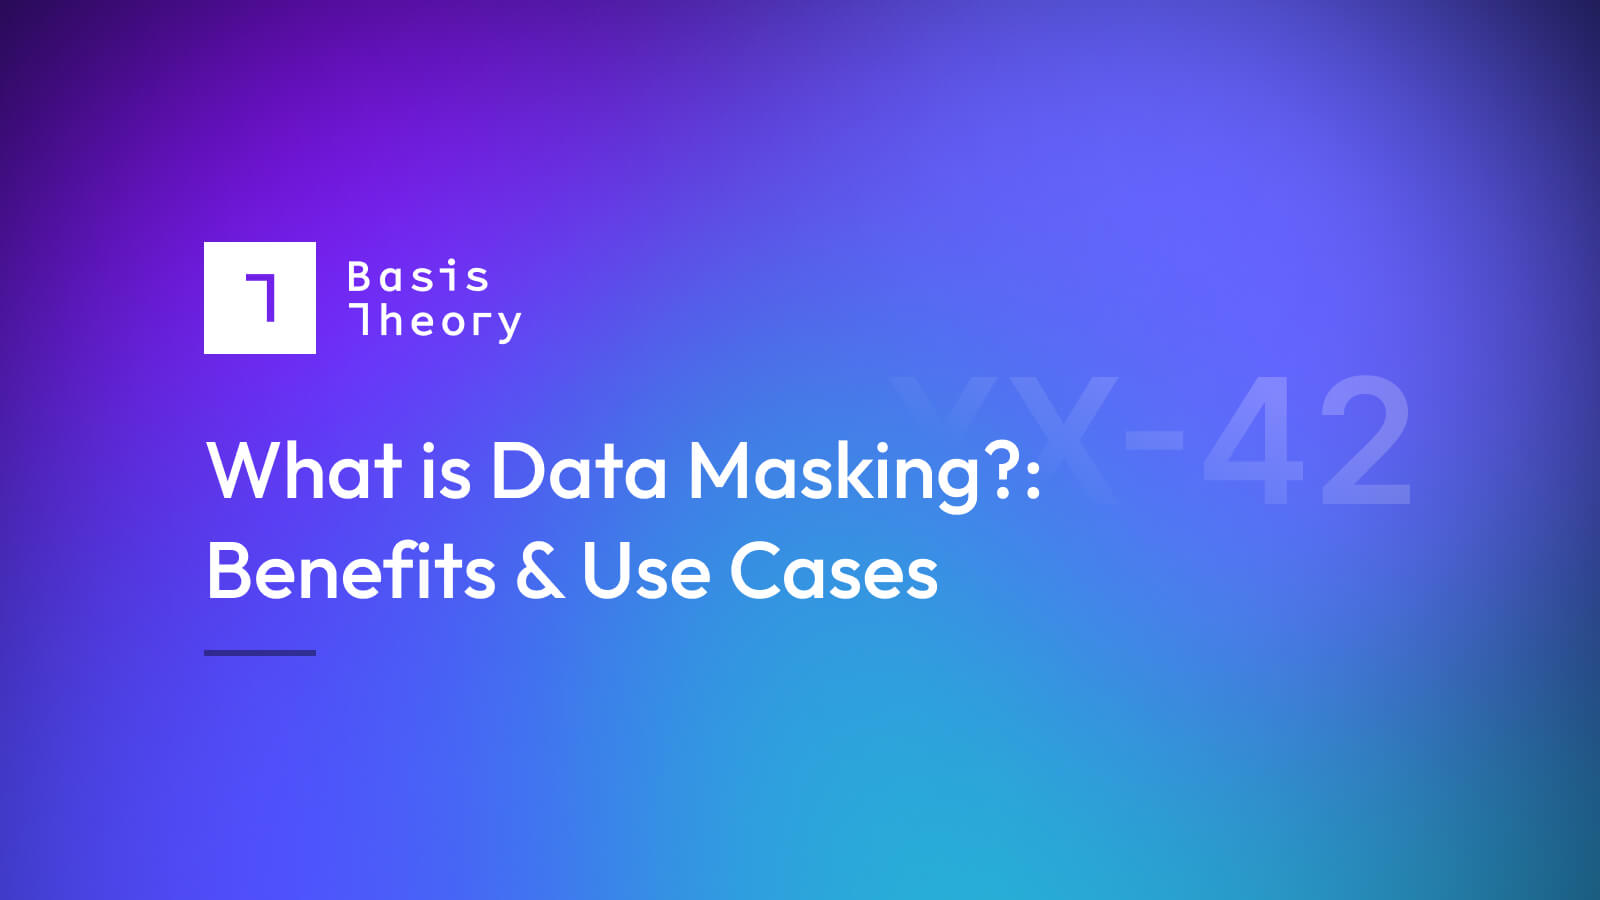 what is data masking?